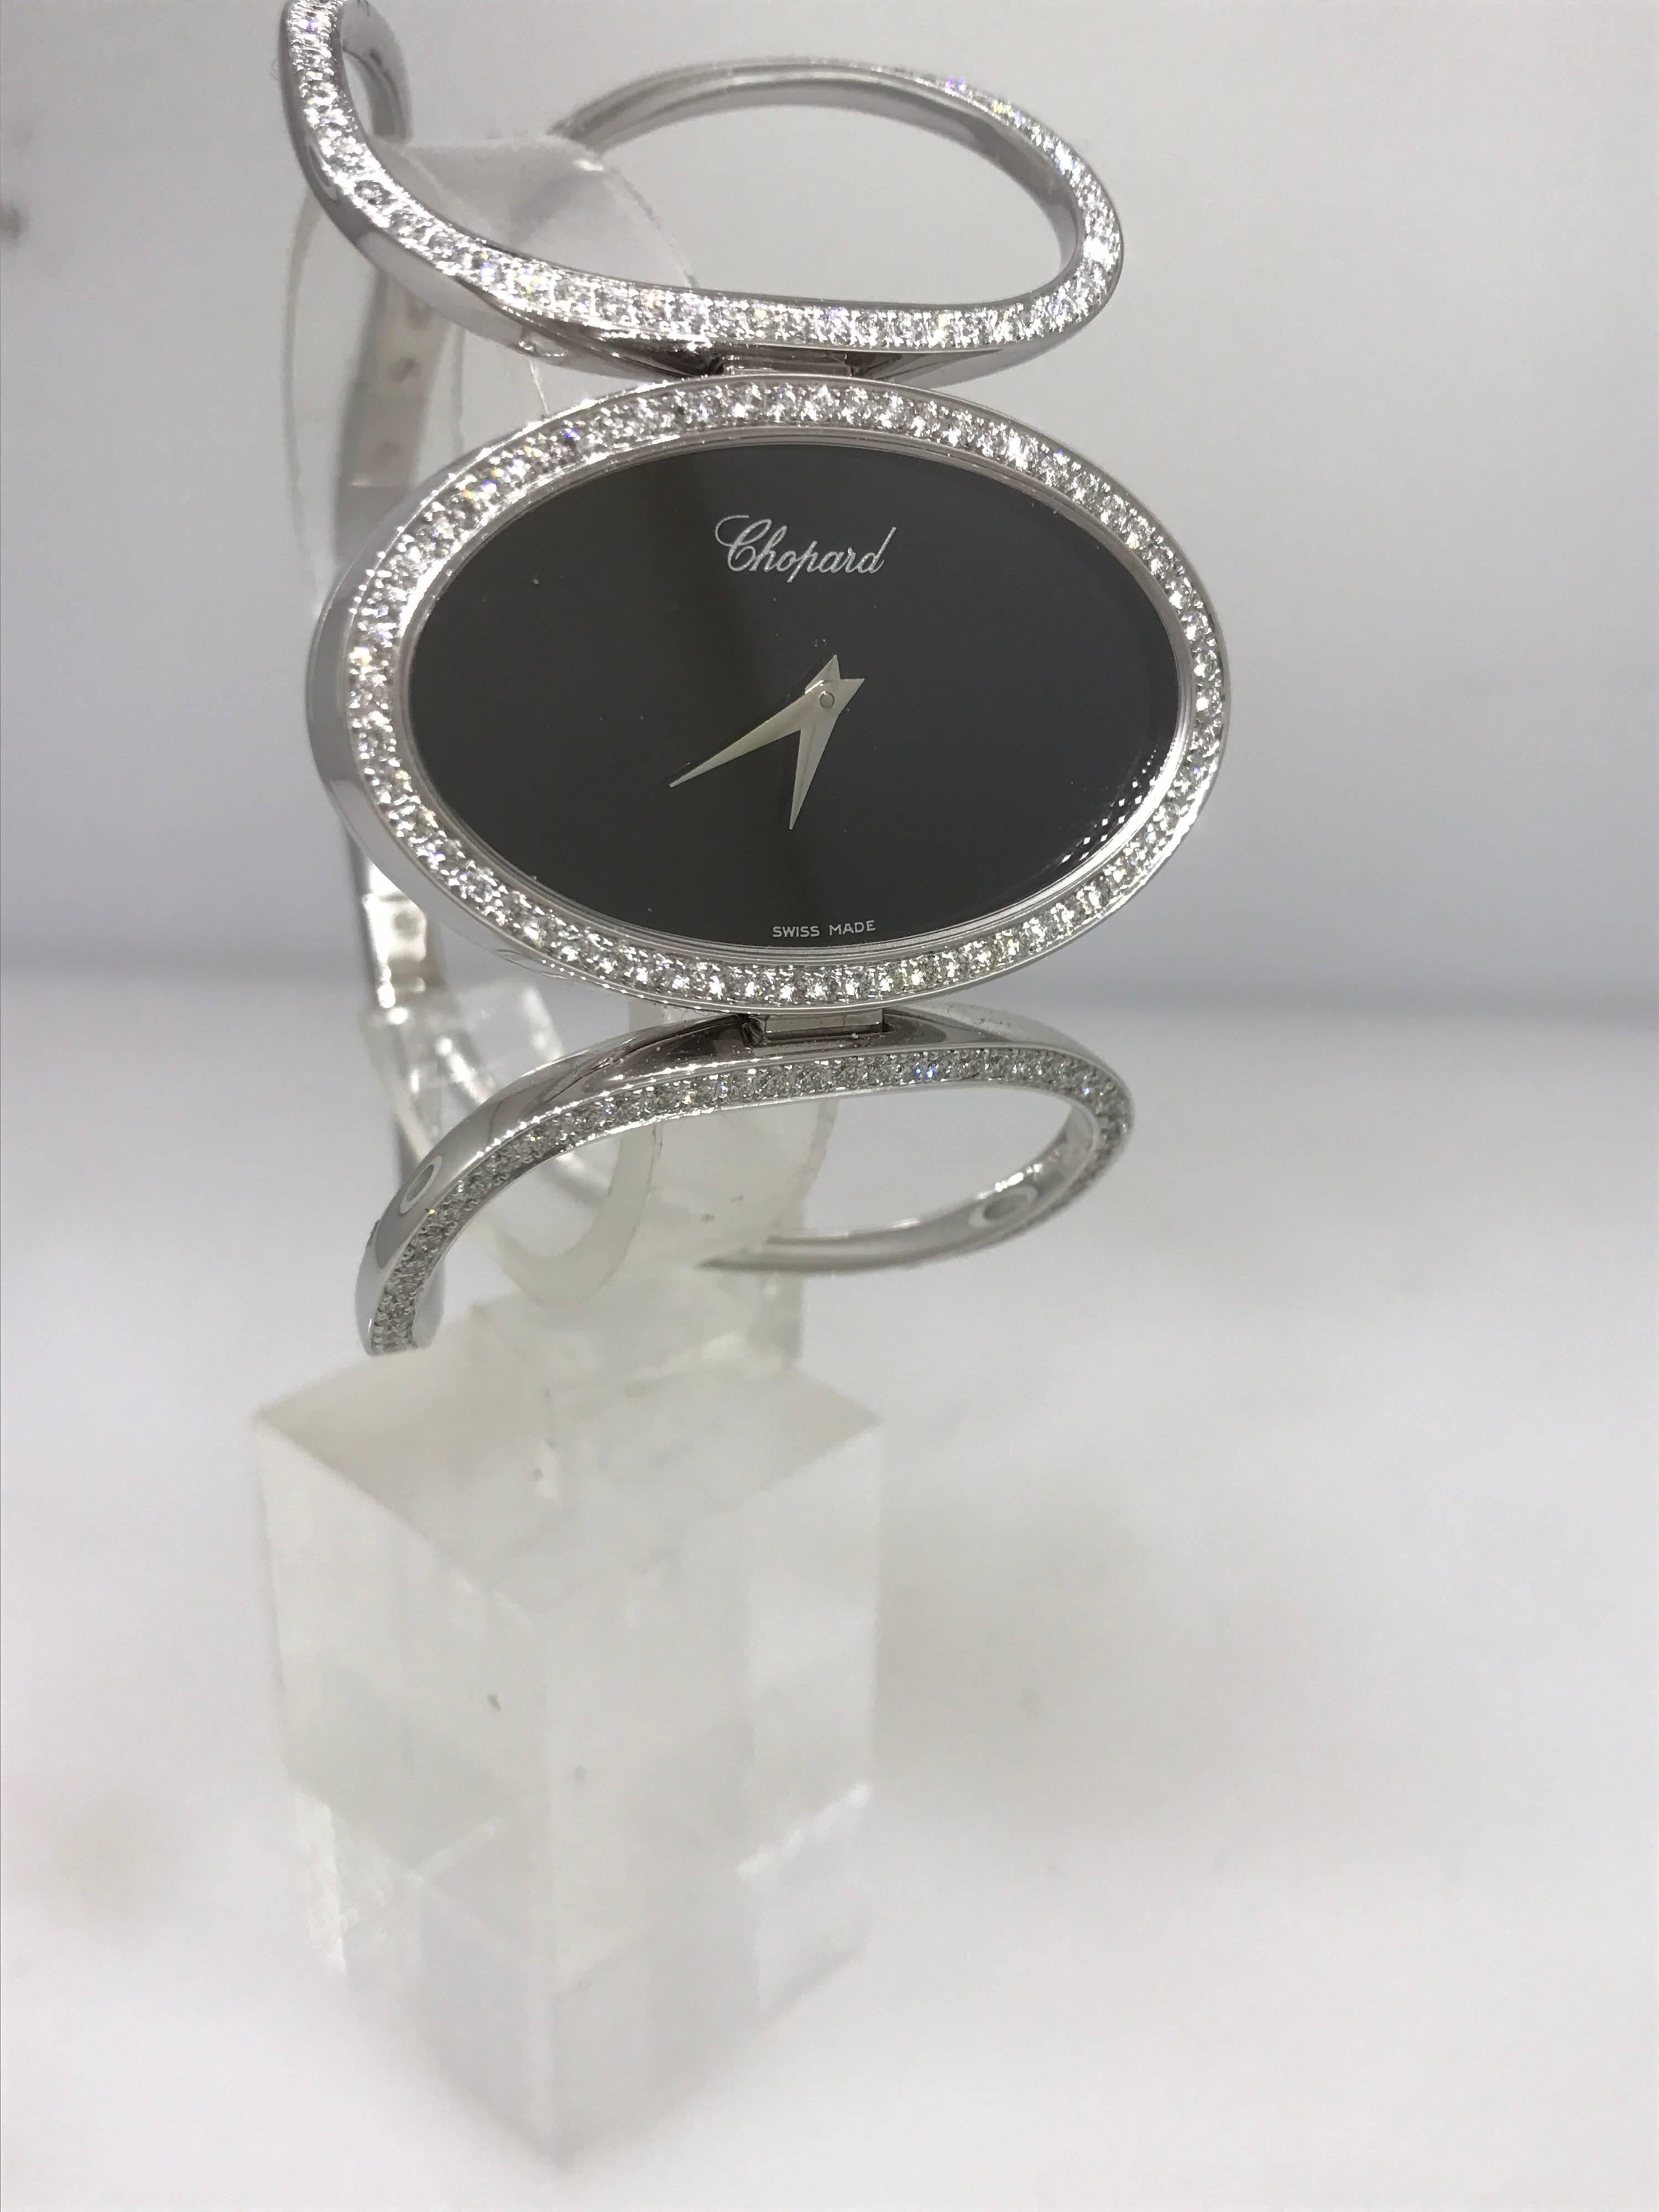 Chopard Classique White Gold and Diamond Oval Case Bracelet Bangle Lady’s Watch In Excellent Condition For Sale In New York, NY